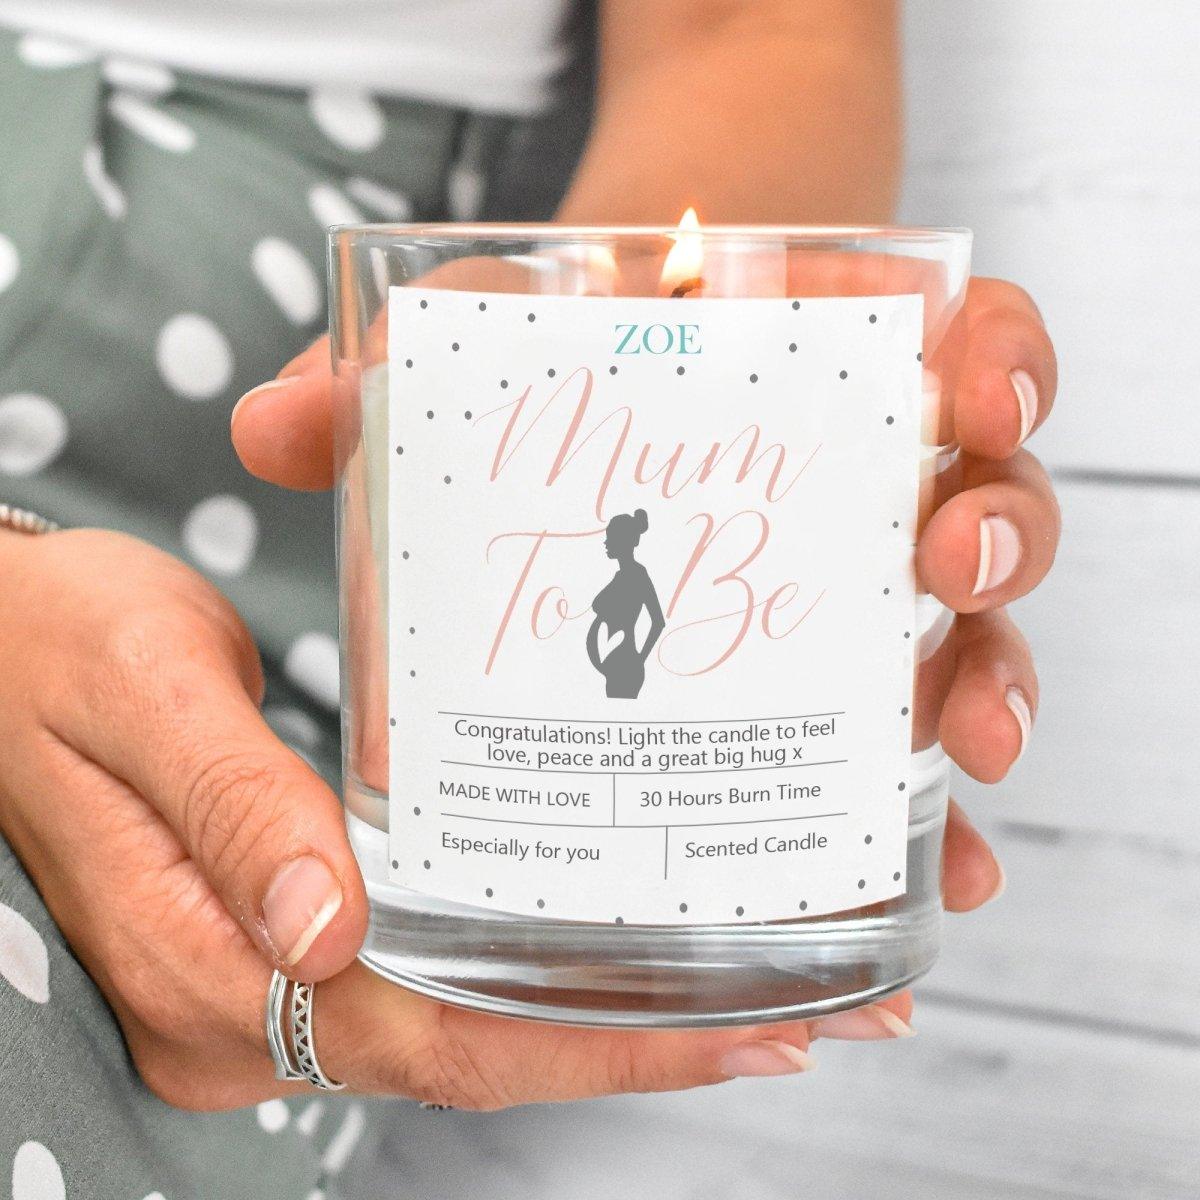 Personalised New Mum Candle, Mum To Be Gift, Personalised New Mum Gifts, Baby Shower Gift, Personalised Mum Gifts, Mum Gift,Pregnancy Gift - Amy Lucy